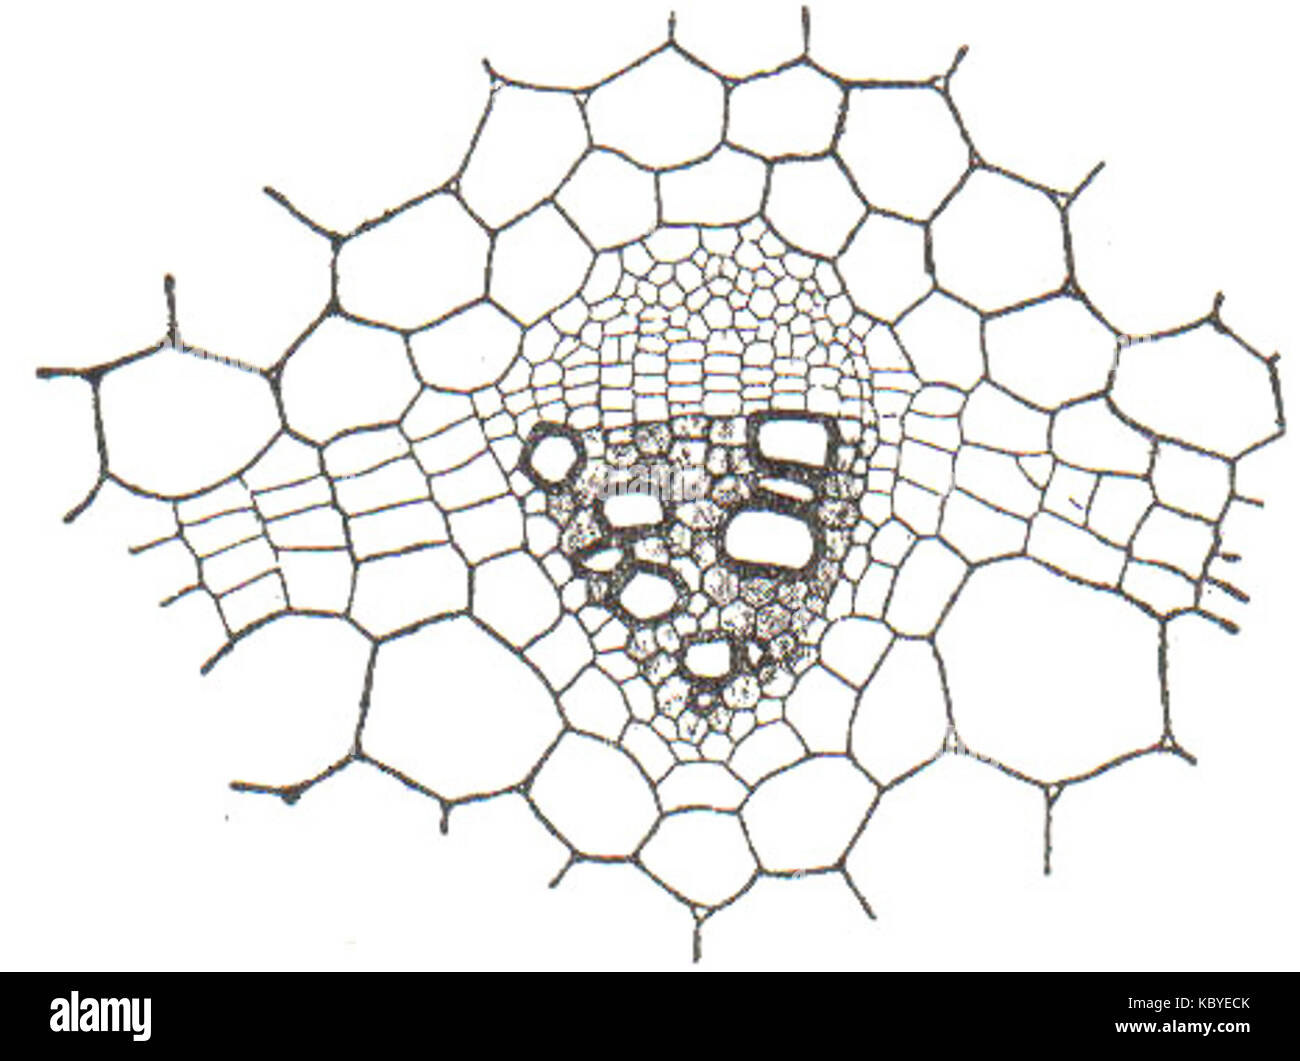 NSRW A Collateral Vascular Bundle Stock Photo